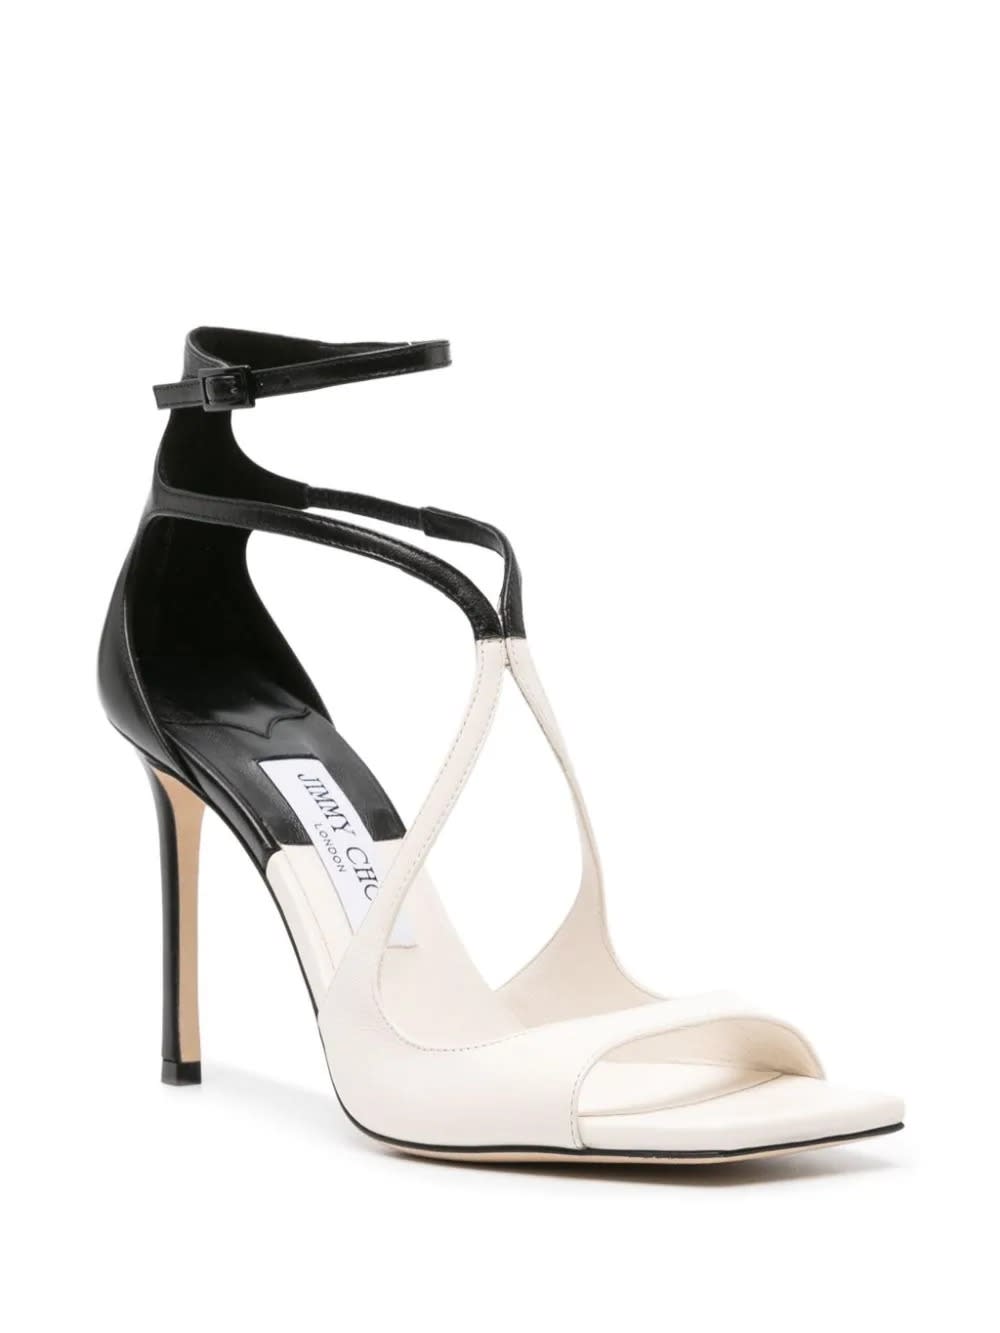 Shop Jimmy Choo Azia Sandals In Black And White Milk Patchwork Nappa Leather In Multicolour